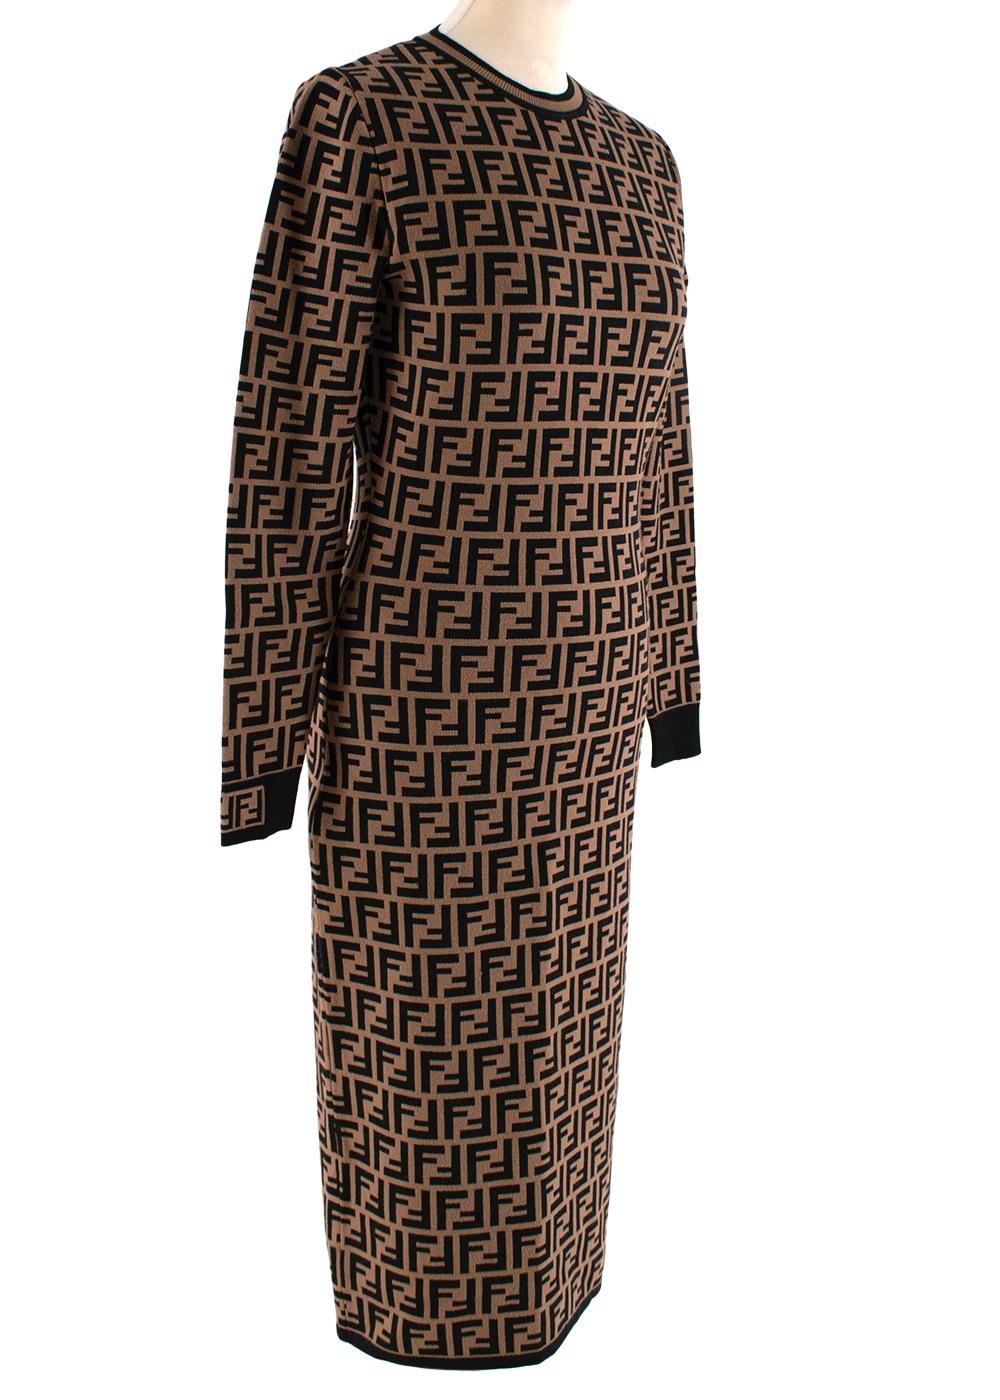 Fendi Tobacco Brown Fendi Monogram Knit Dress 

- Lightweight stretch knit viscose with allover FF monogram
- Round neck, long sleeve with ribbed collar, cuffs, and hem
- Close-fitting, finishing below the knee
- Unlined 

Materials 
67% Viscose
33%